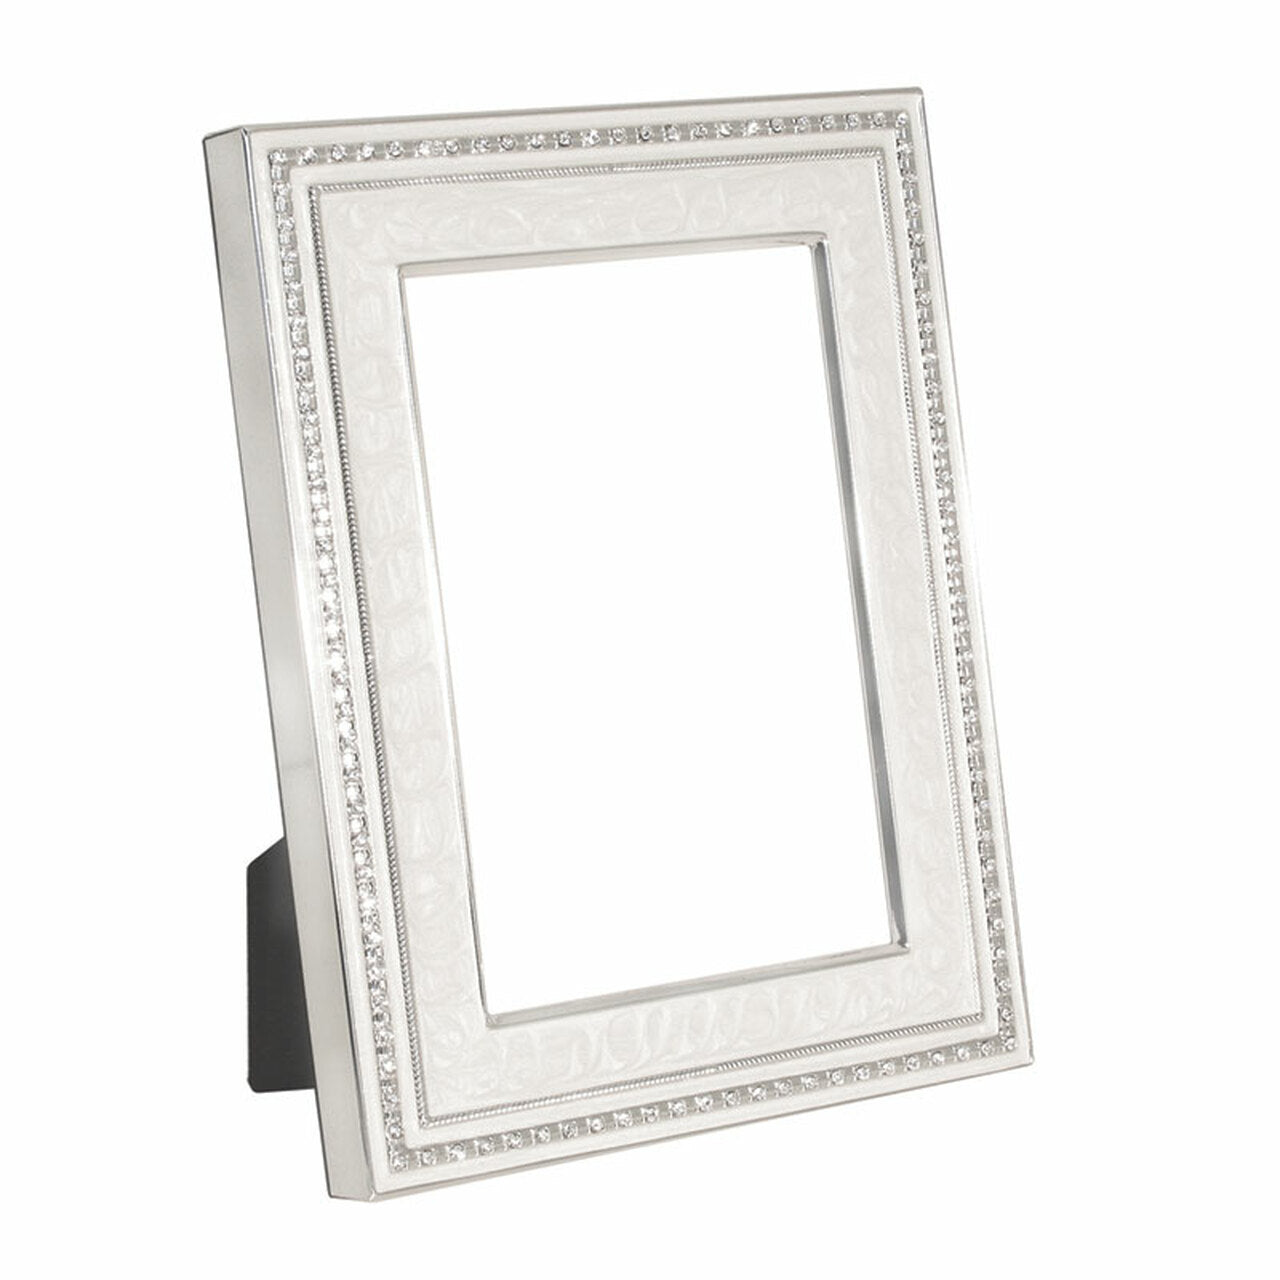 Tipperary Crystal Celebrations Frame 4 Inch x 6 Inch  Share beautiful memories in your living space with luxury Tipperary's picture frames, crafted with care and designed to complement your most precious memories.  Celebrations Frame 4 Inch x 6 Inch